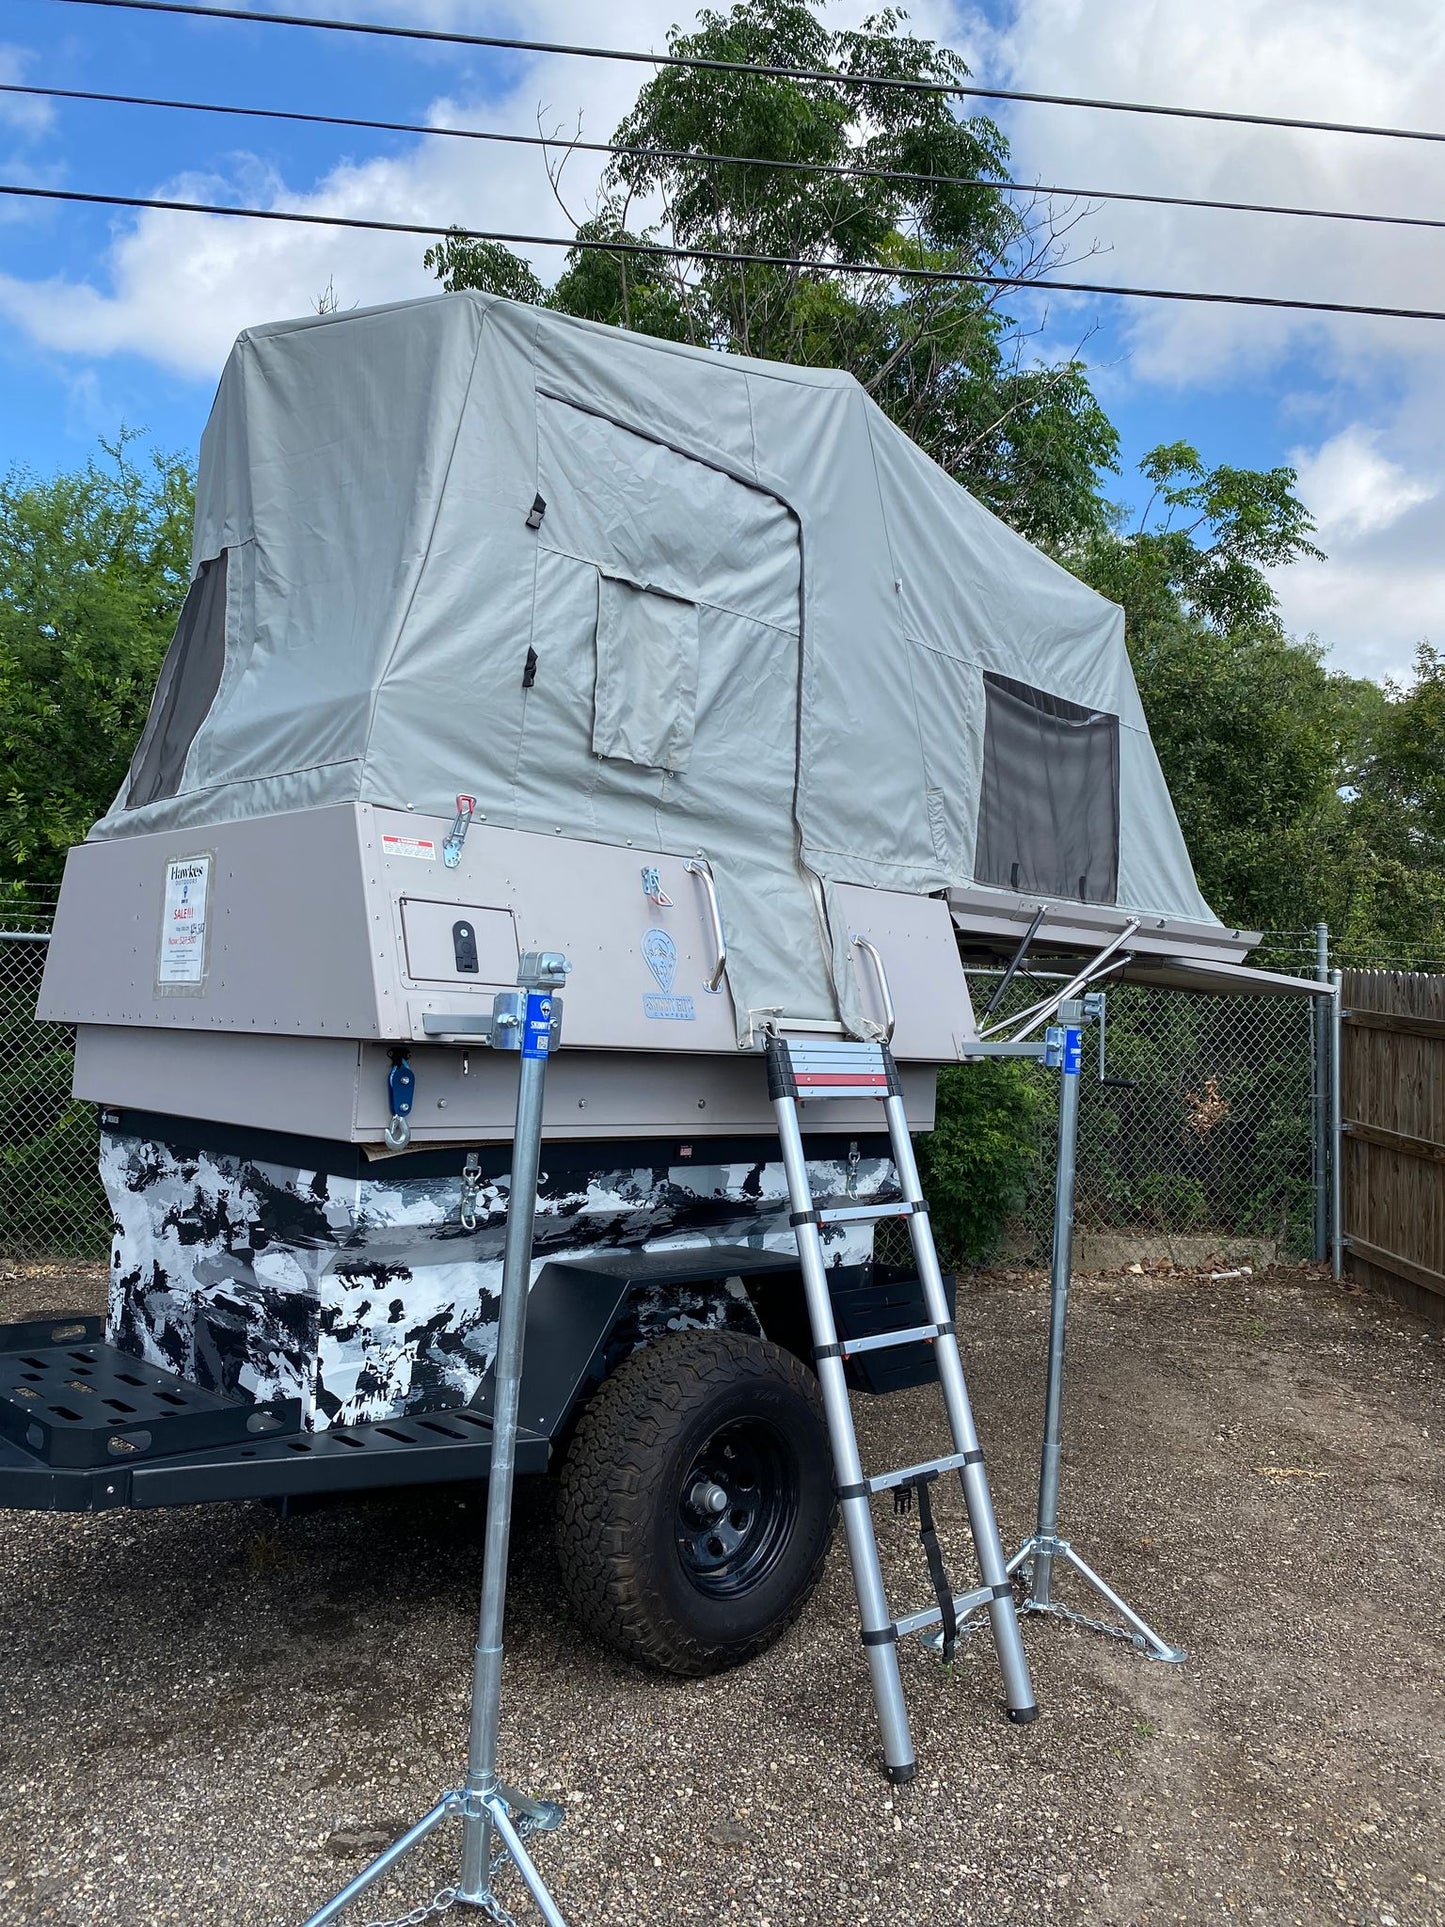 skinny guy truck bed all weather campers kit n kaboodle with outdoor kitchen and solar for sale near uvalde hondo texas at hawkes outdoors 2102512882